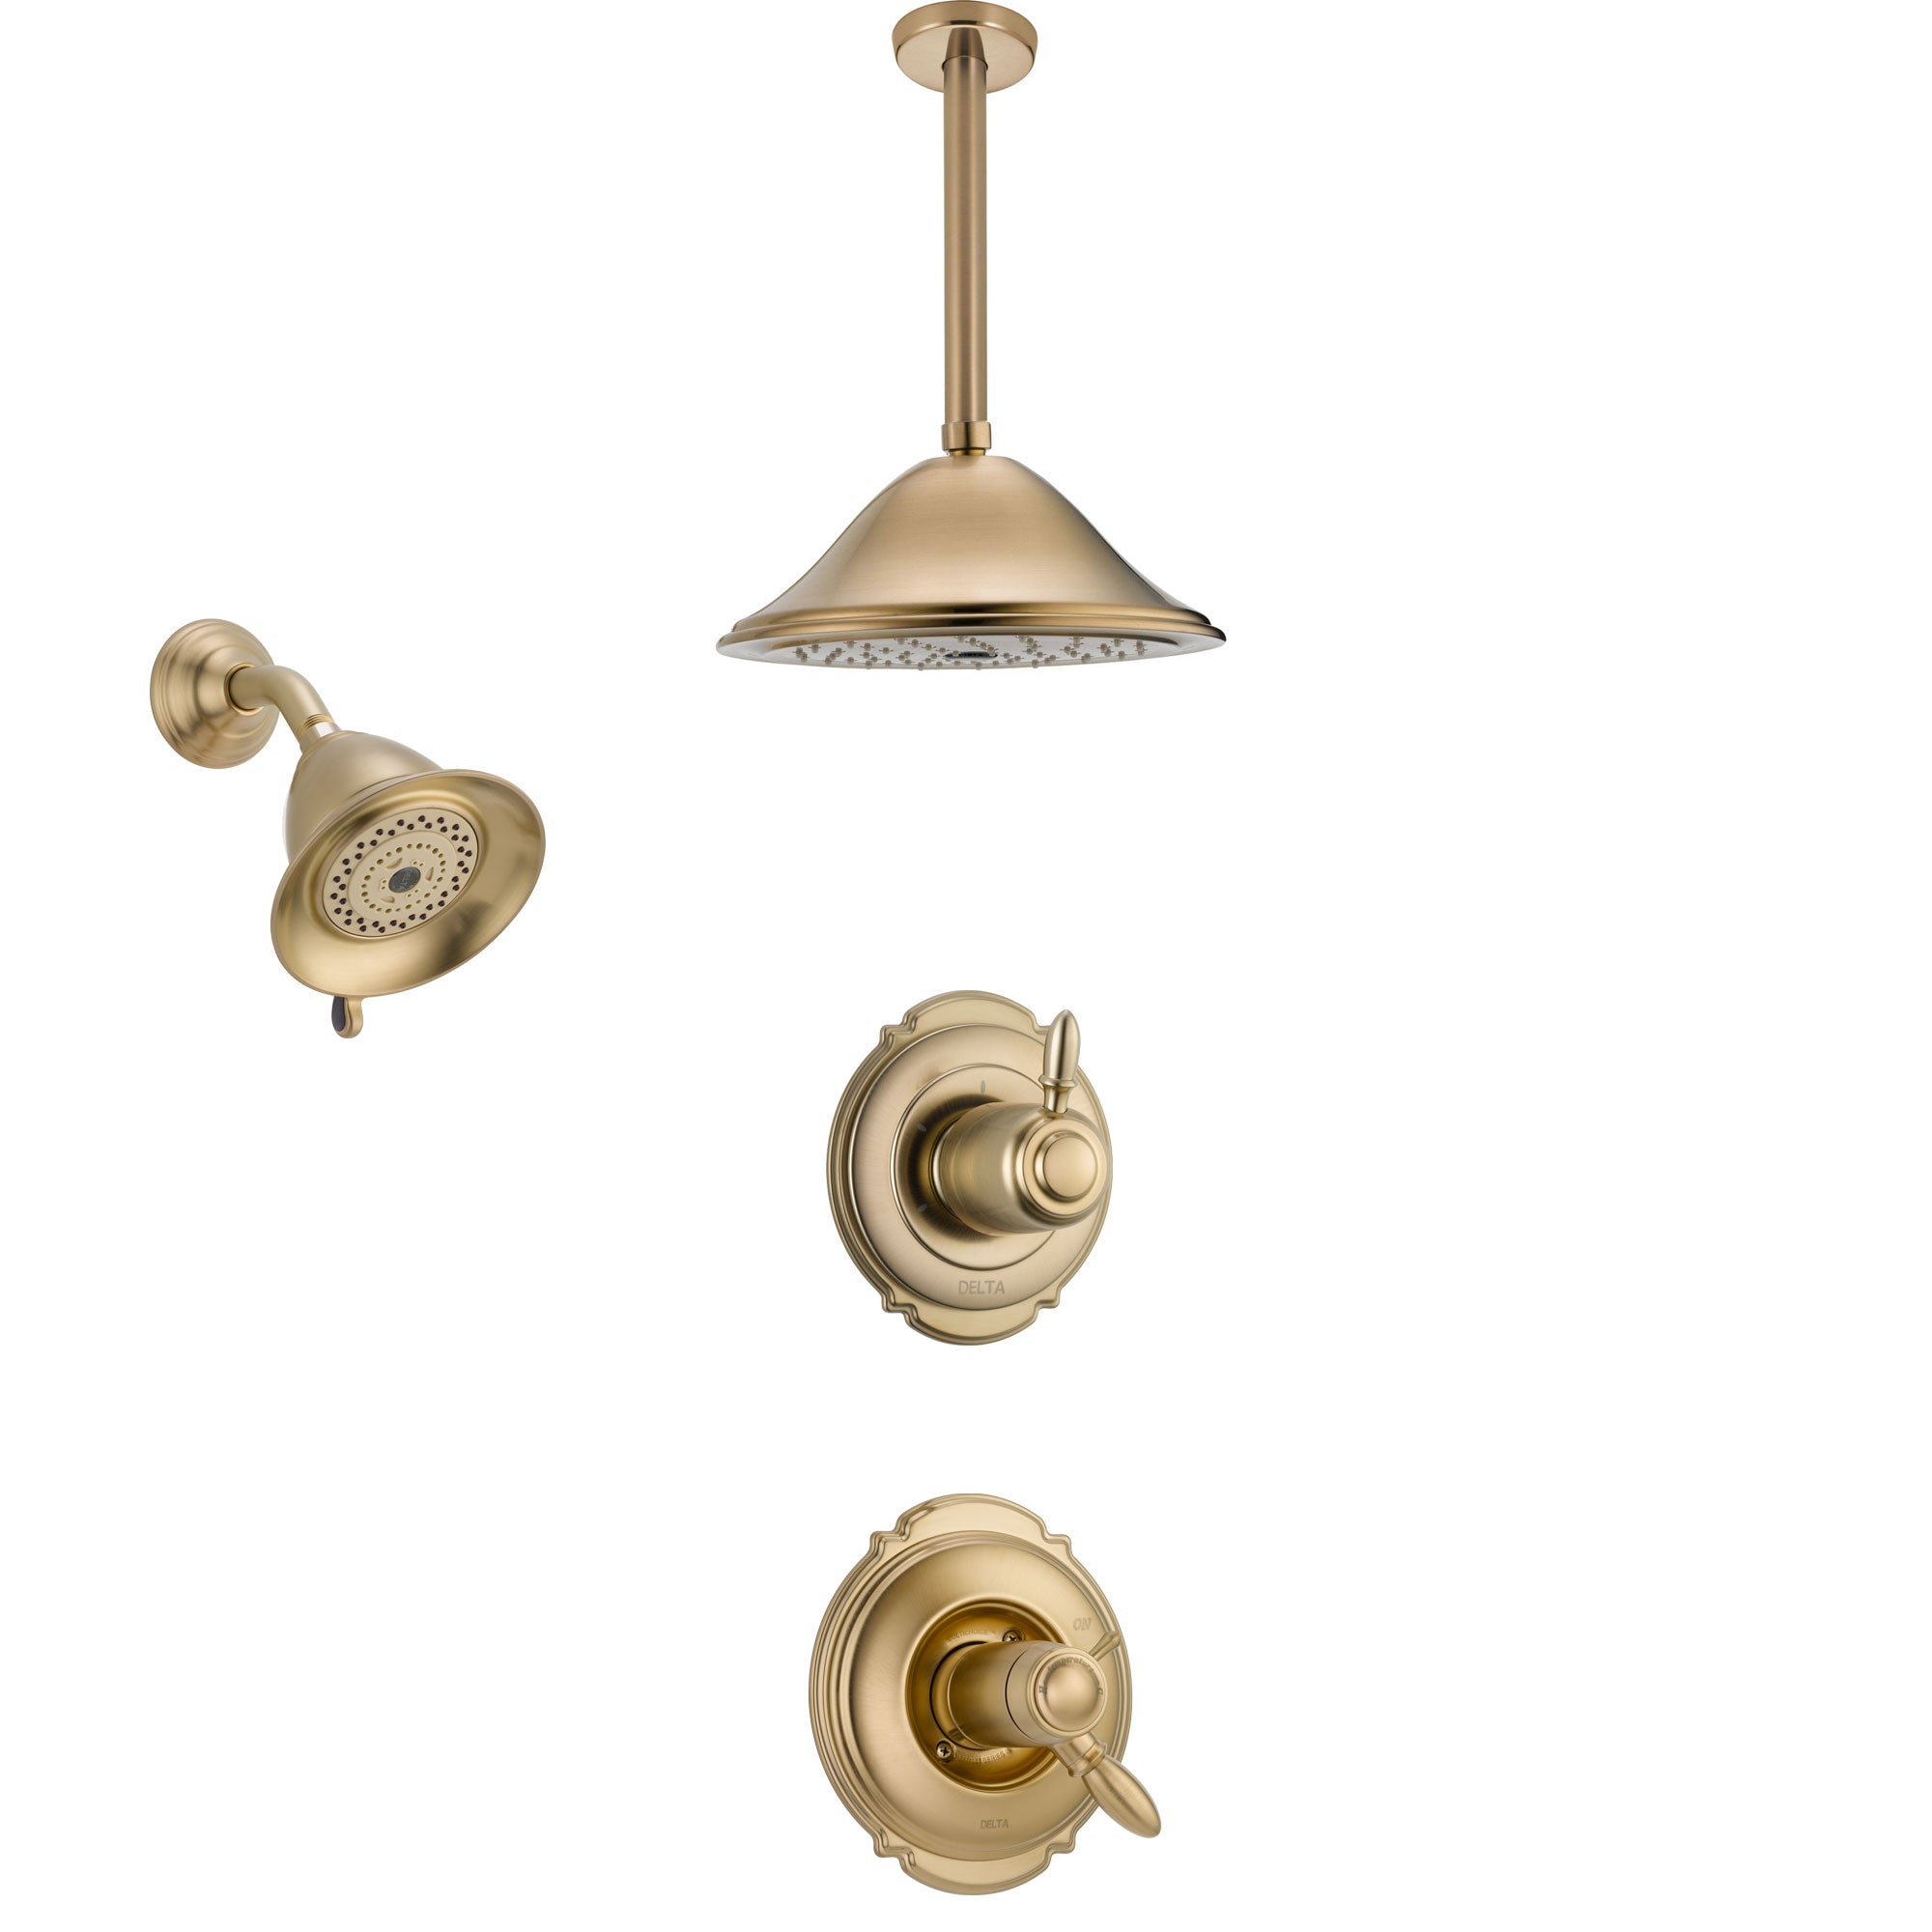 Delta Victorian Champagne Bronze Shower System with Dual Thermostatic Control Handle, Diverter, Showerhead, and Ceiling Mount Showerhead SS17T2552CZ5